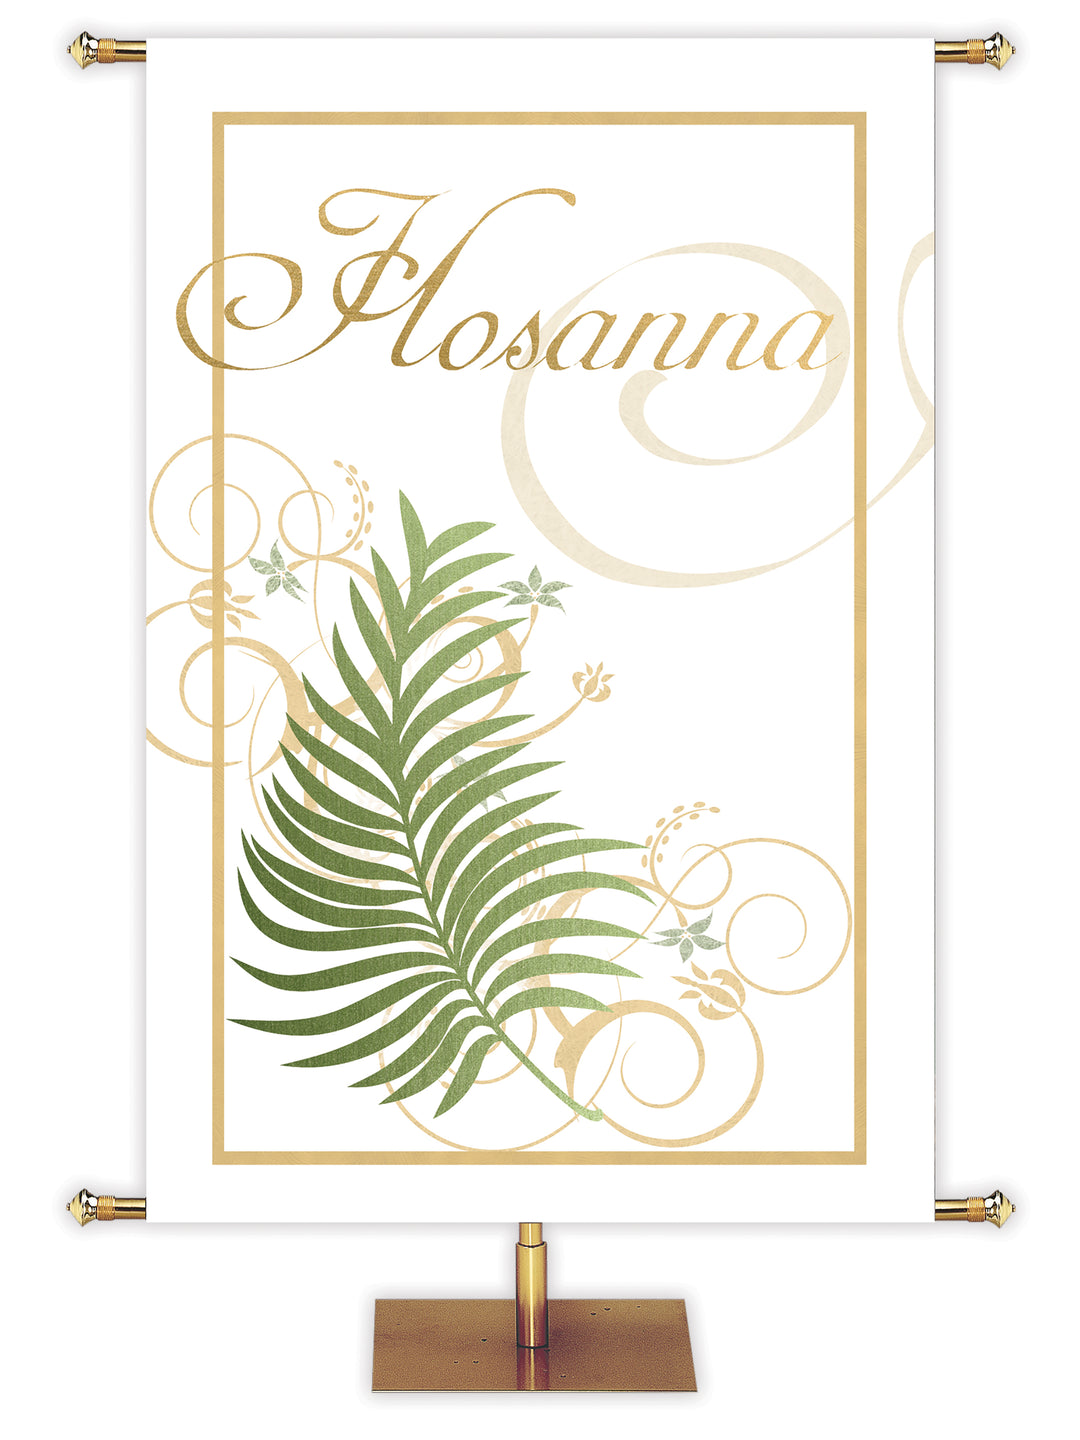 Hosanna Spanish Easter Banner with palm and gold accents in the look of sparkling foil on white